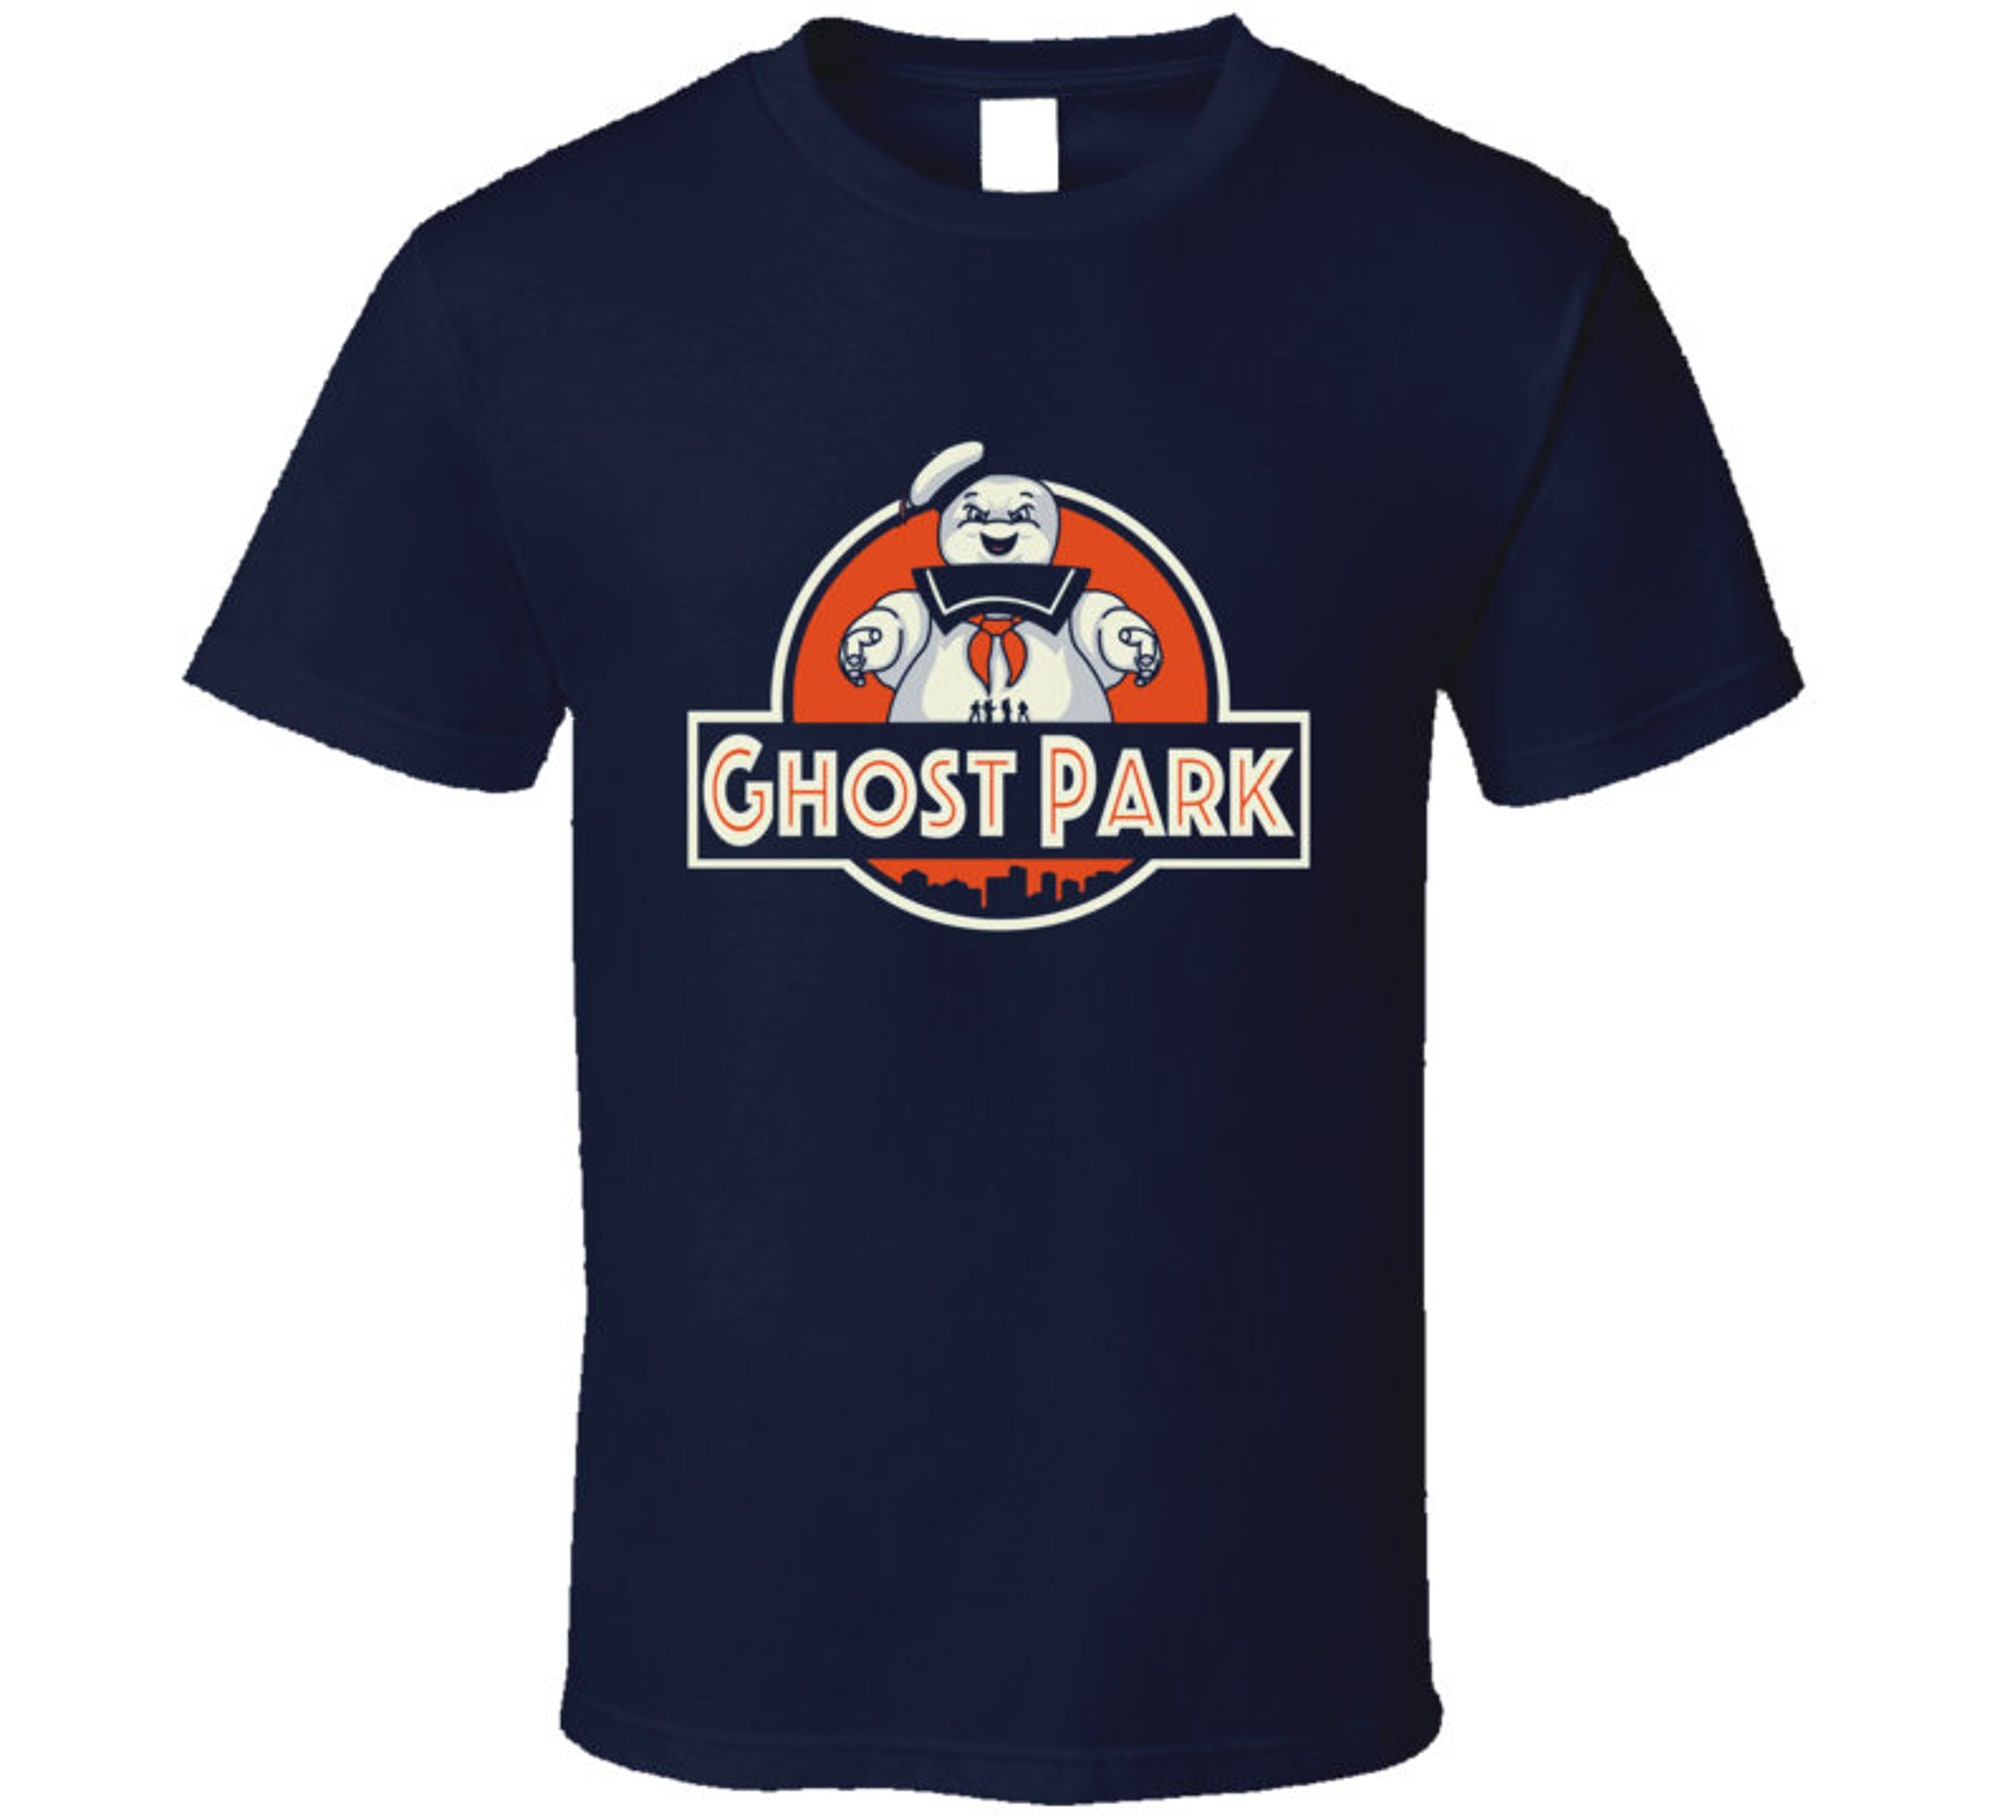 Funny Ghost Park Jurassic Park Logo Mashup Ghost Busters Stay Puft Marshmellow Man T Shirt